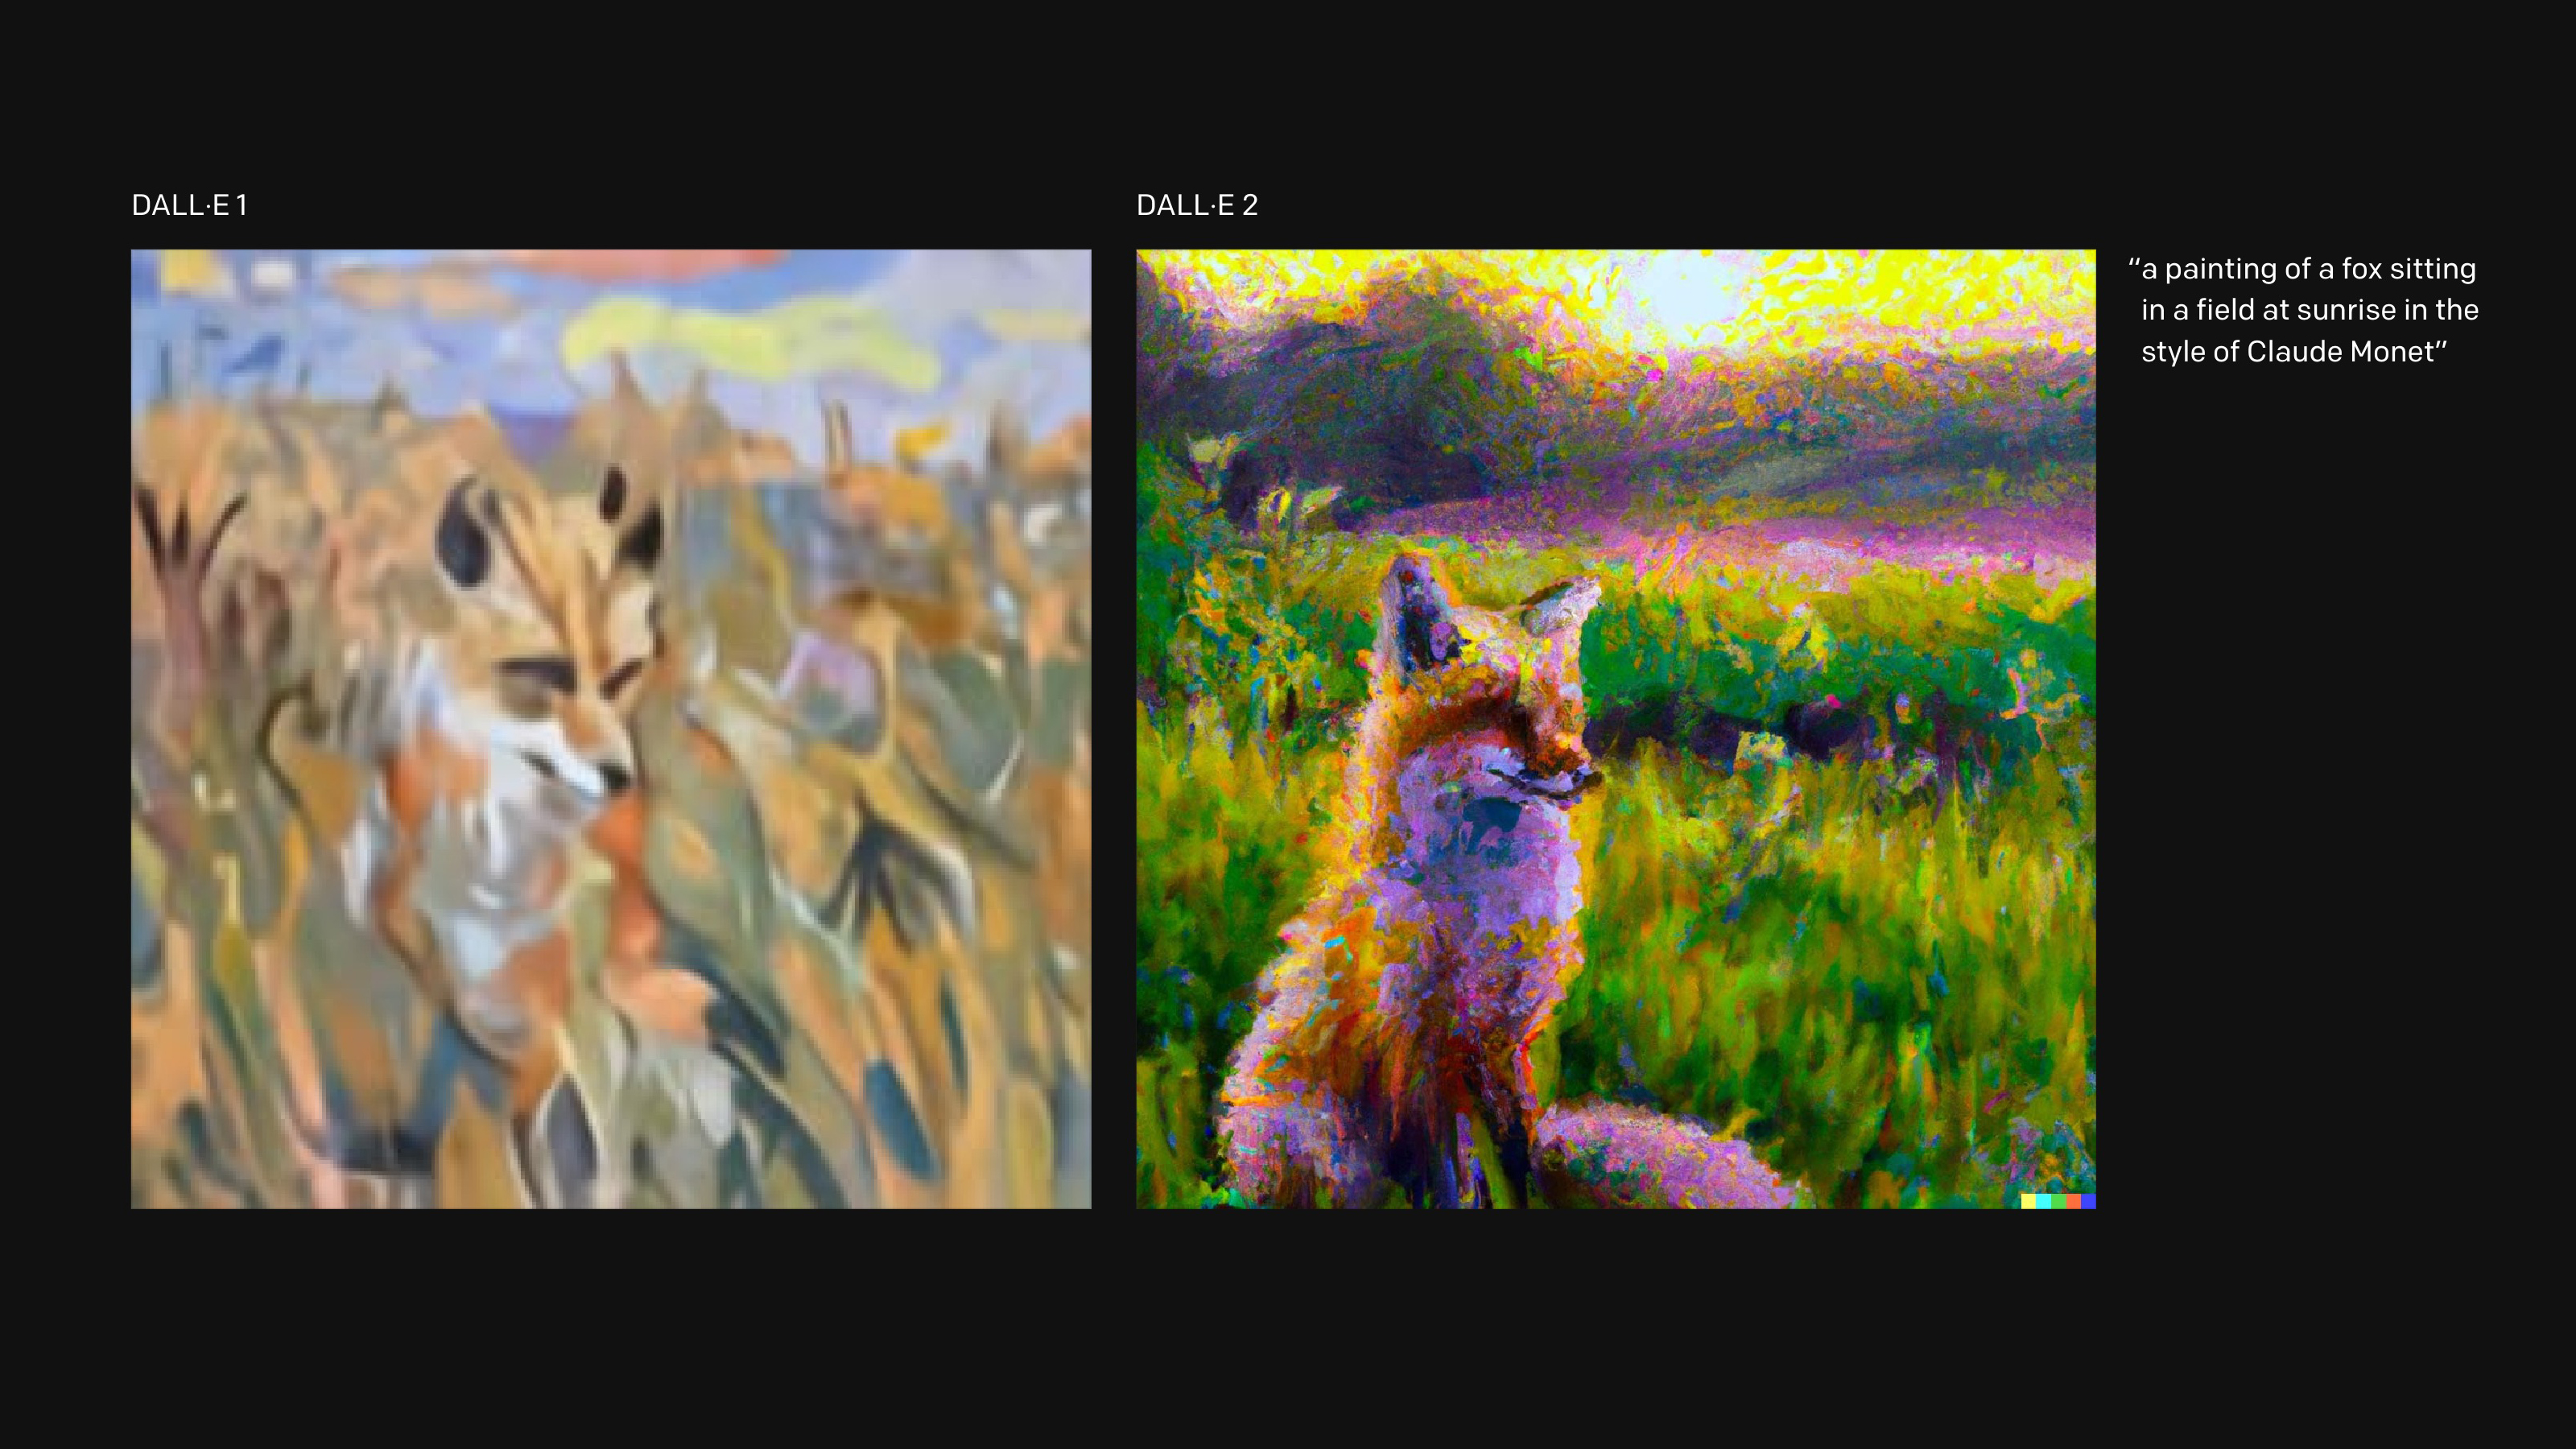 foxes images created by Dall-E